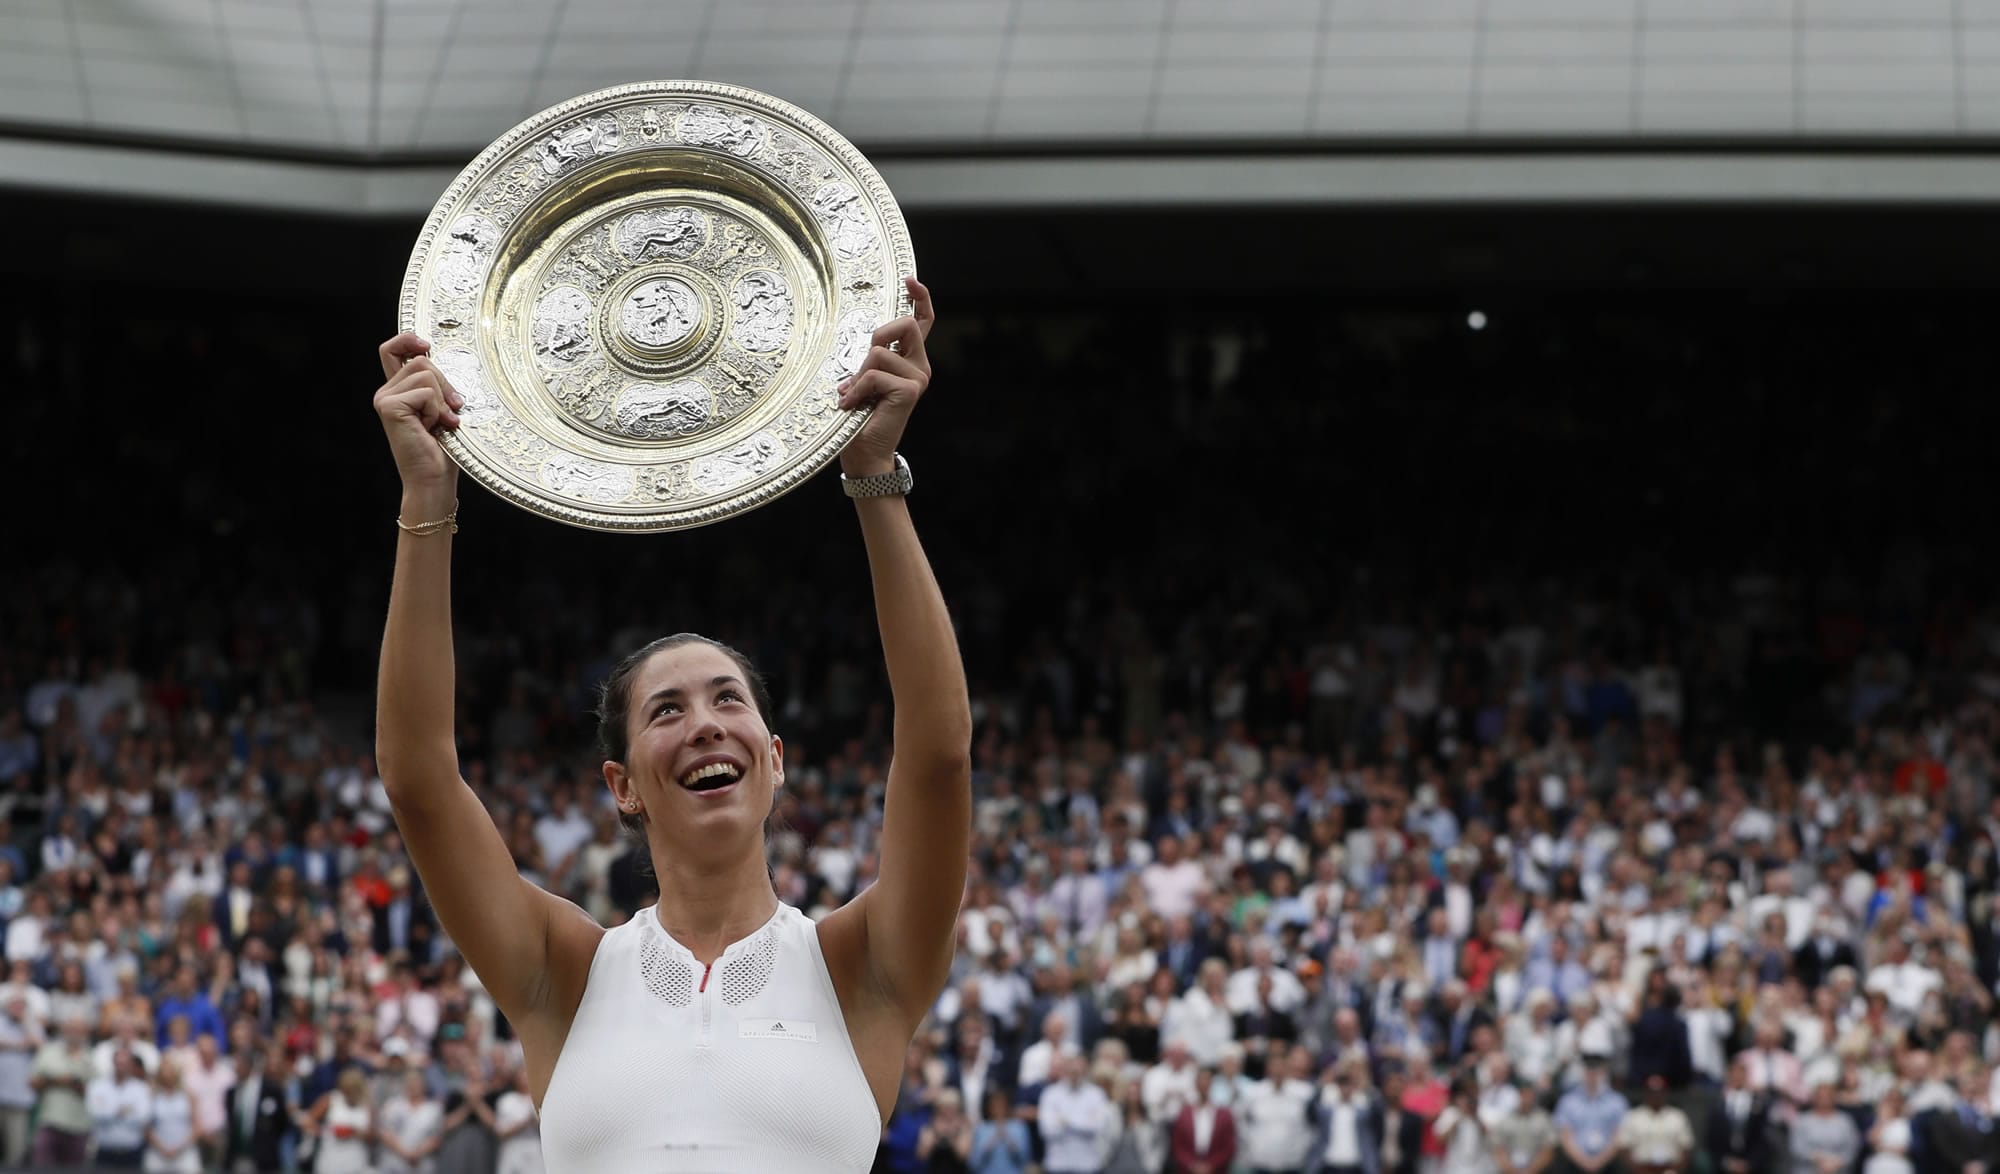 Spain's Garbine Muguruza holds the trophy after defeating Venus Williams of the United States in the Women's Singles final match on day twelve at the Wimbledon Tennis Championships in London Saturday, July 15, 2017.